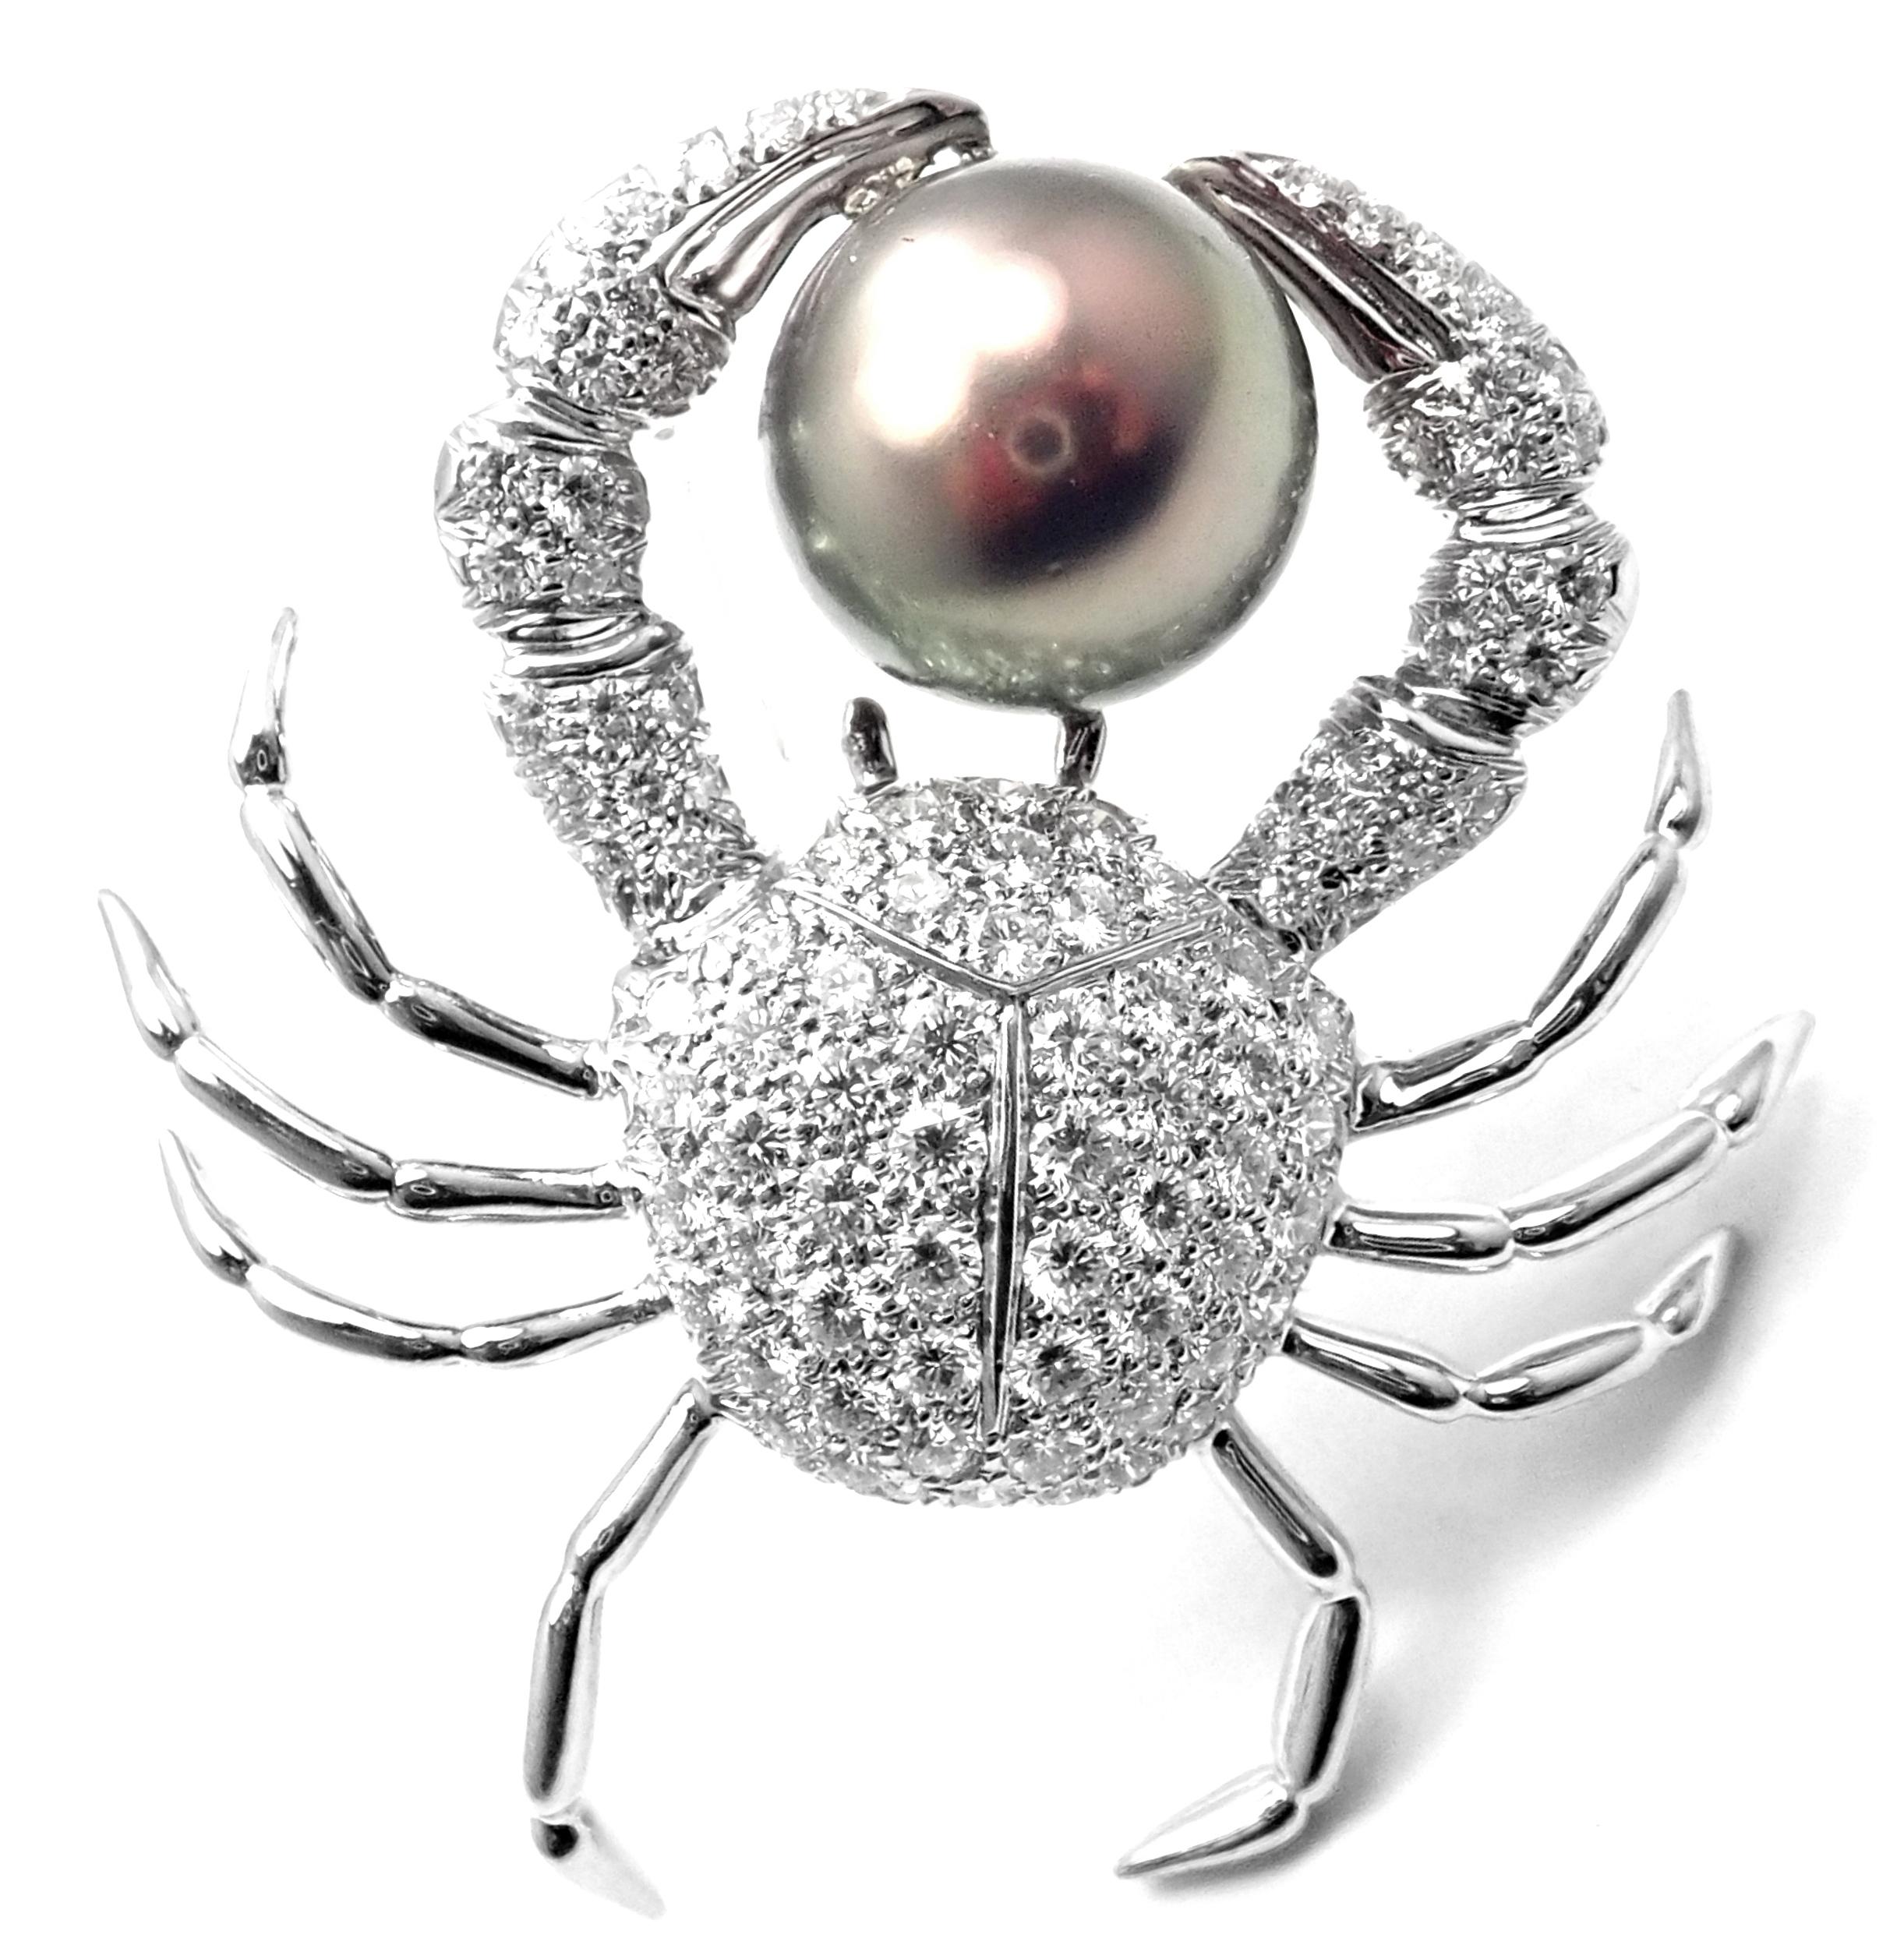 Platinum Diamond and Tahitian Pearl Crab Brooch Pin by Tiffany & Co.
With Round brilliant cut diamonds VS1 clarity, E color total weight approximately 2.70ct
1 large grey Tahitian pearl 14.5mm
Details: 
Measurements: 1 3/4